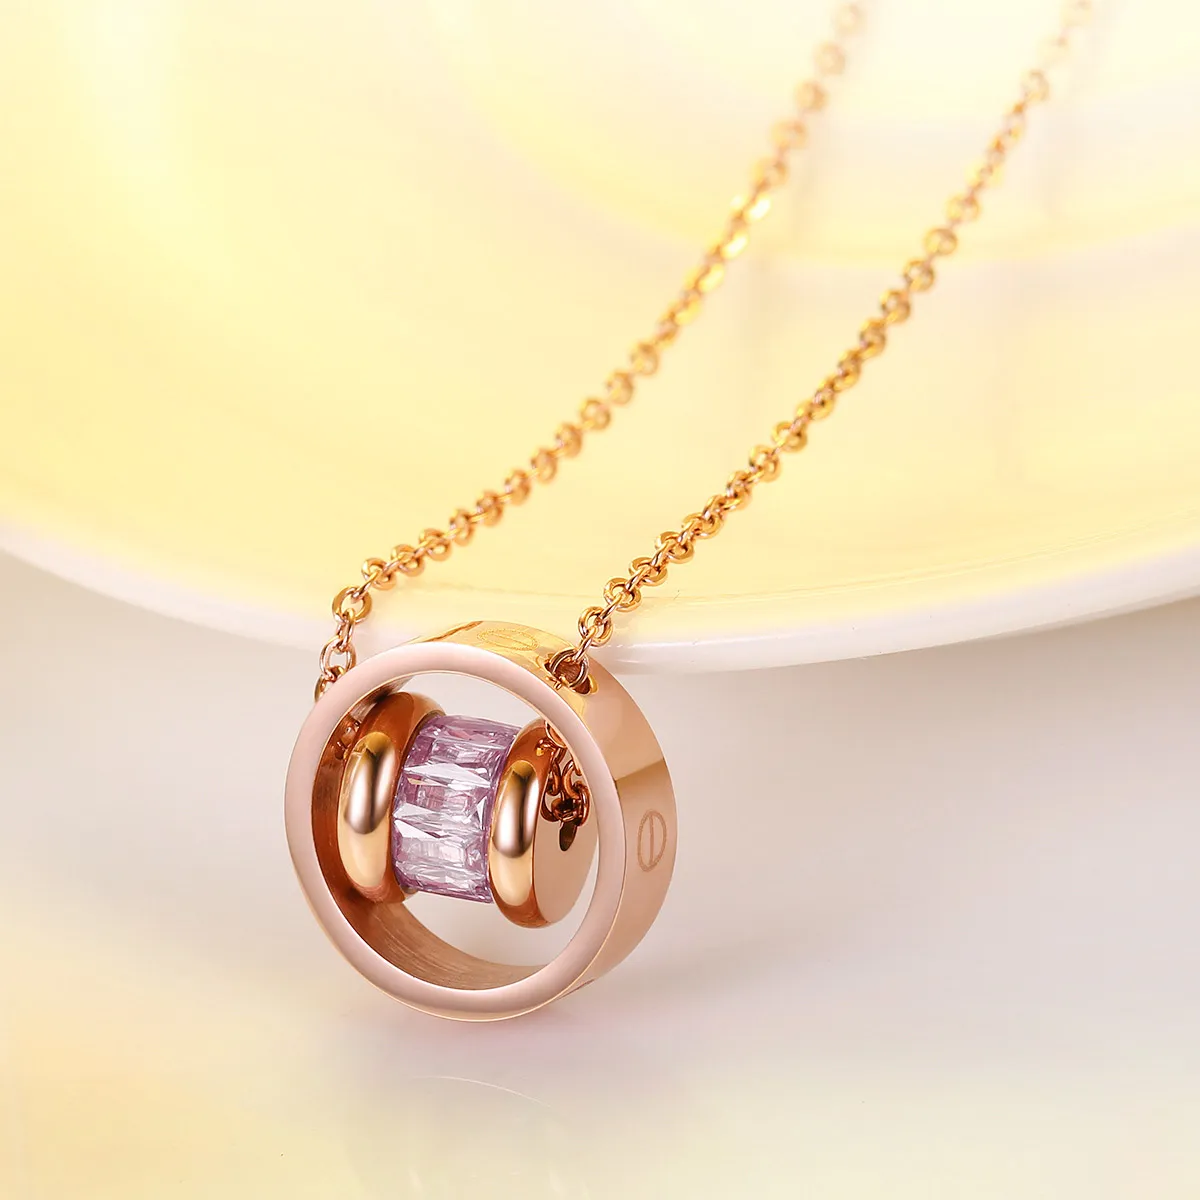 Fashion Design Rose Gold Plated Colorfast Stainless Steel Pendant Necklace Black/Purple/Red Crystal Necklaces